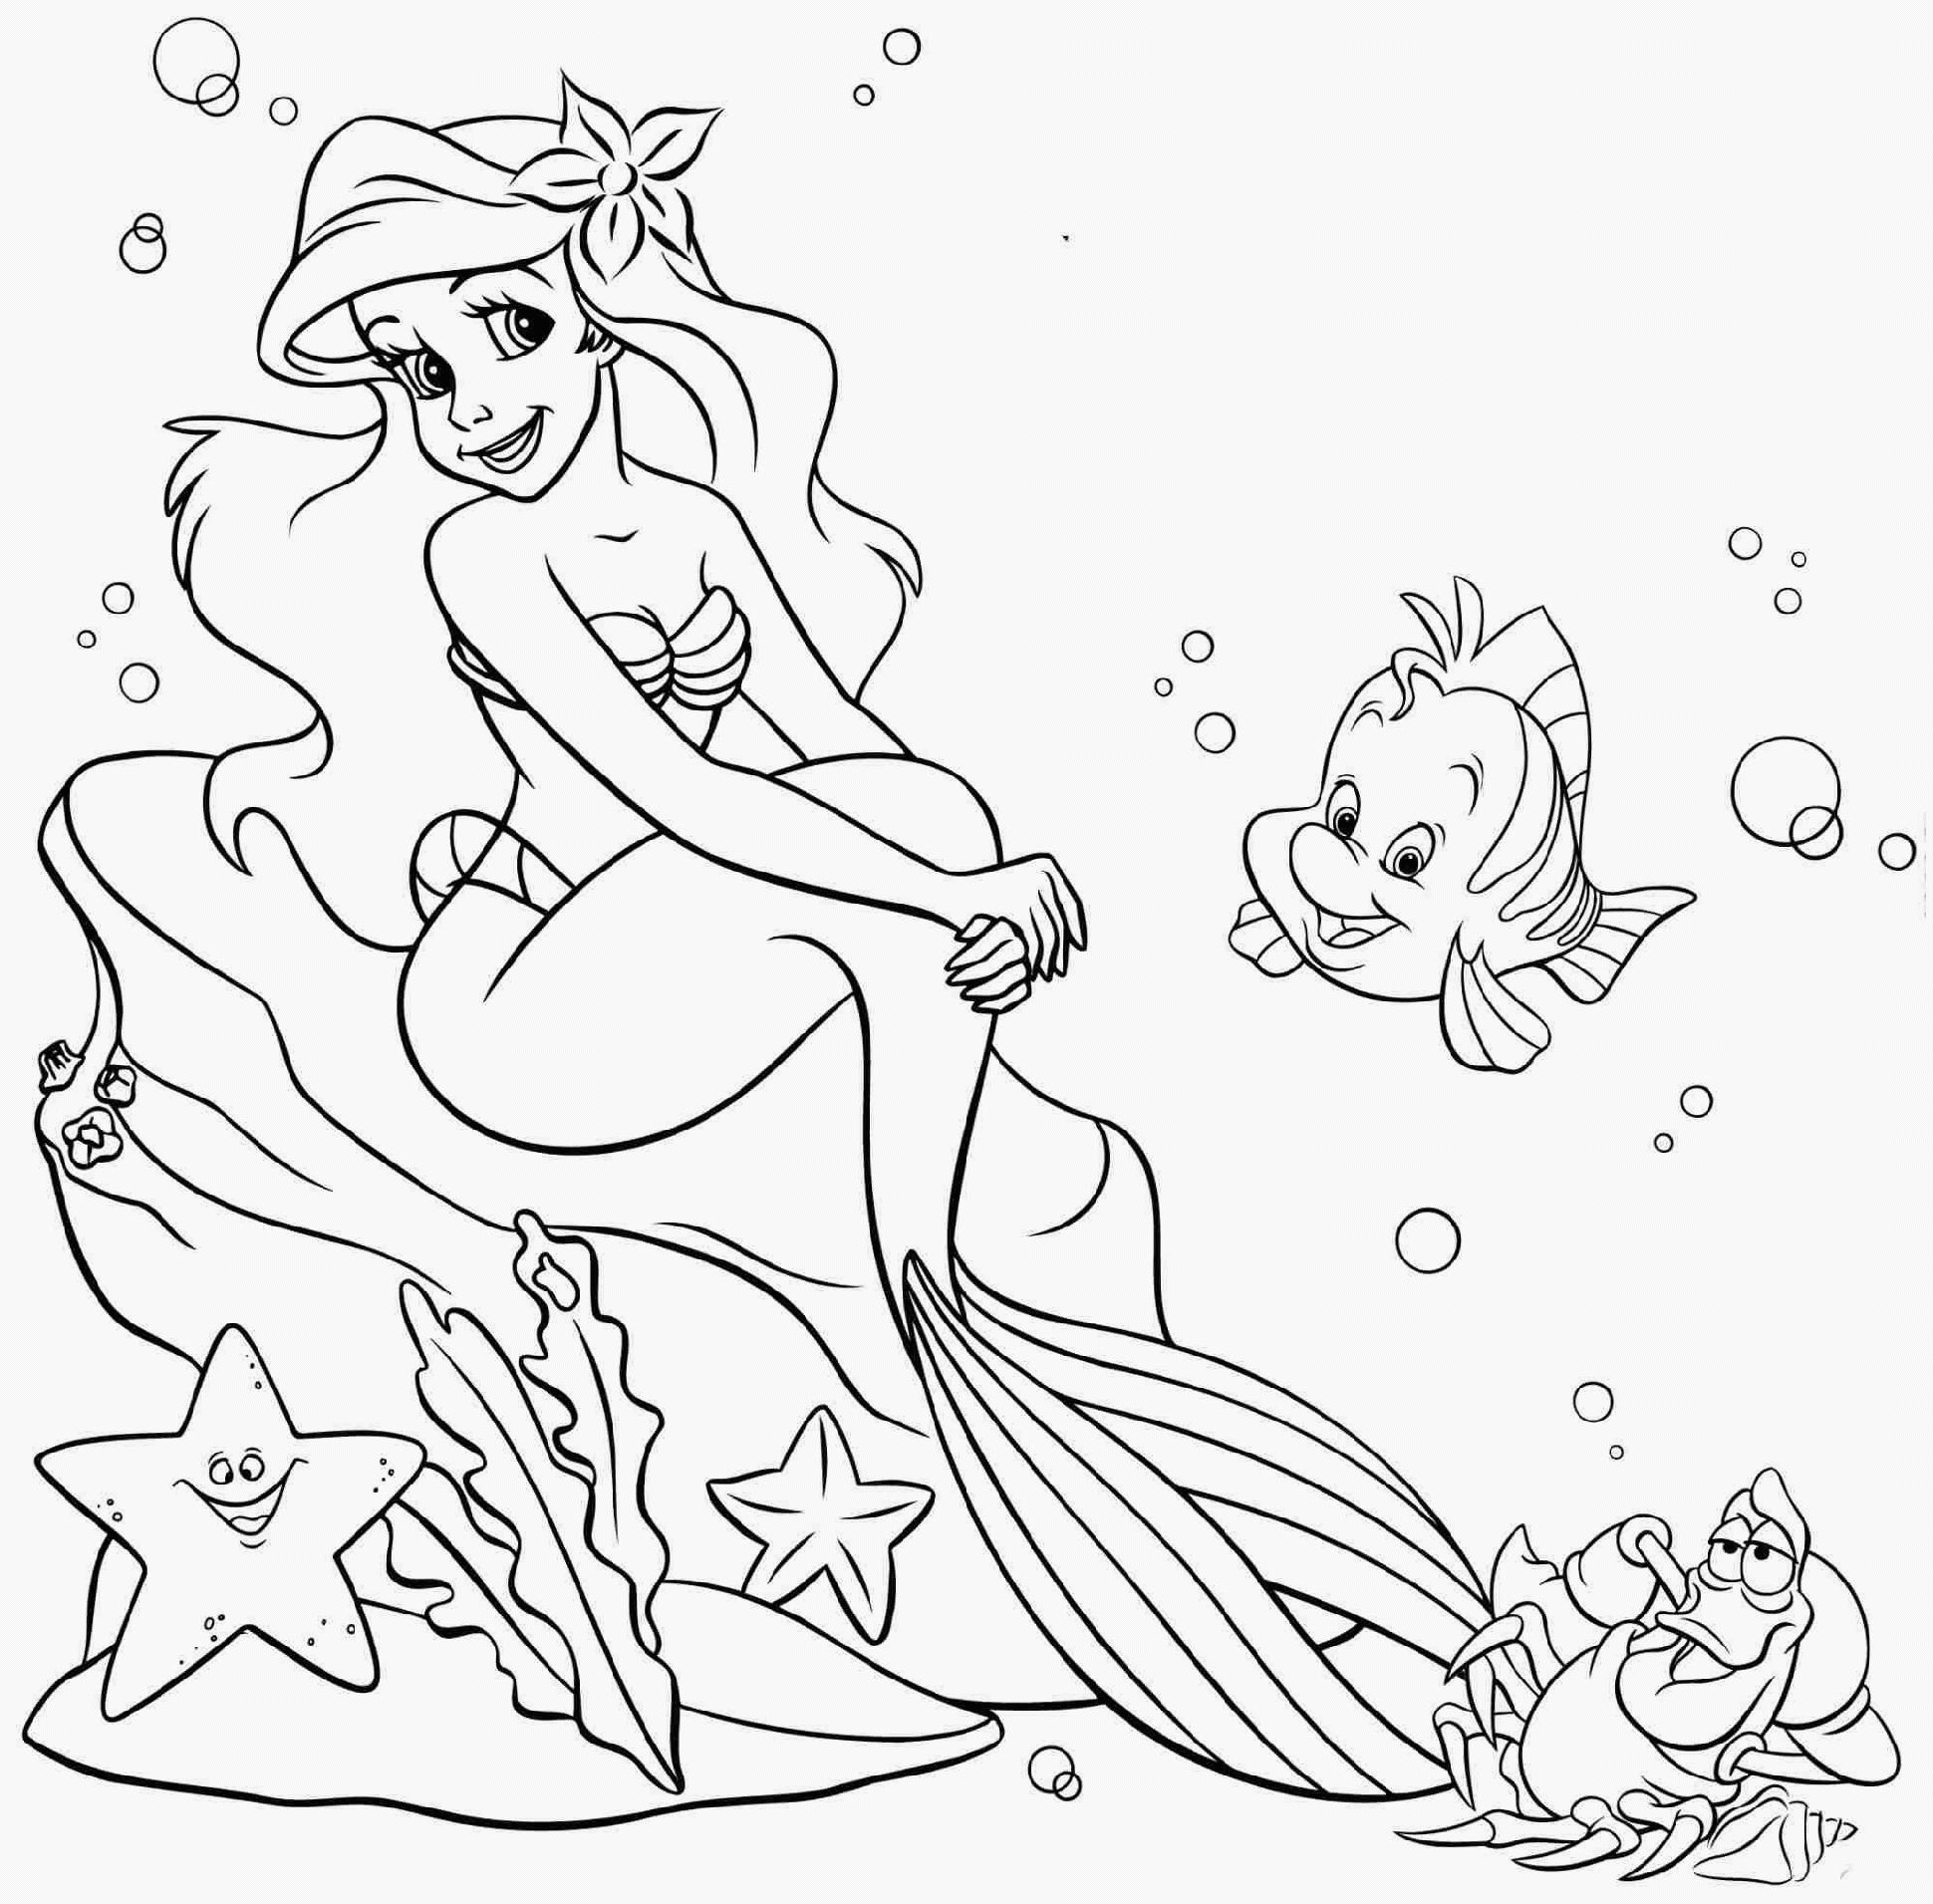 Coloring Pages For Ariel   Coloring Home - Otakugadgets